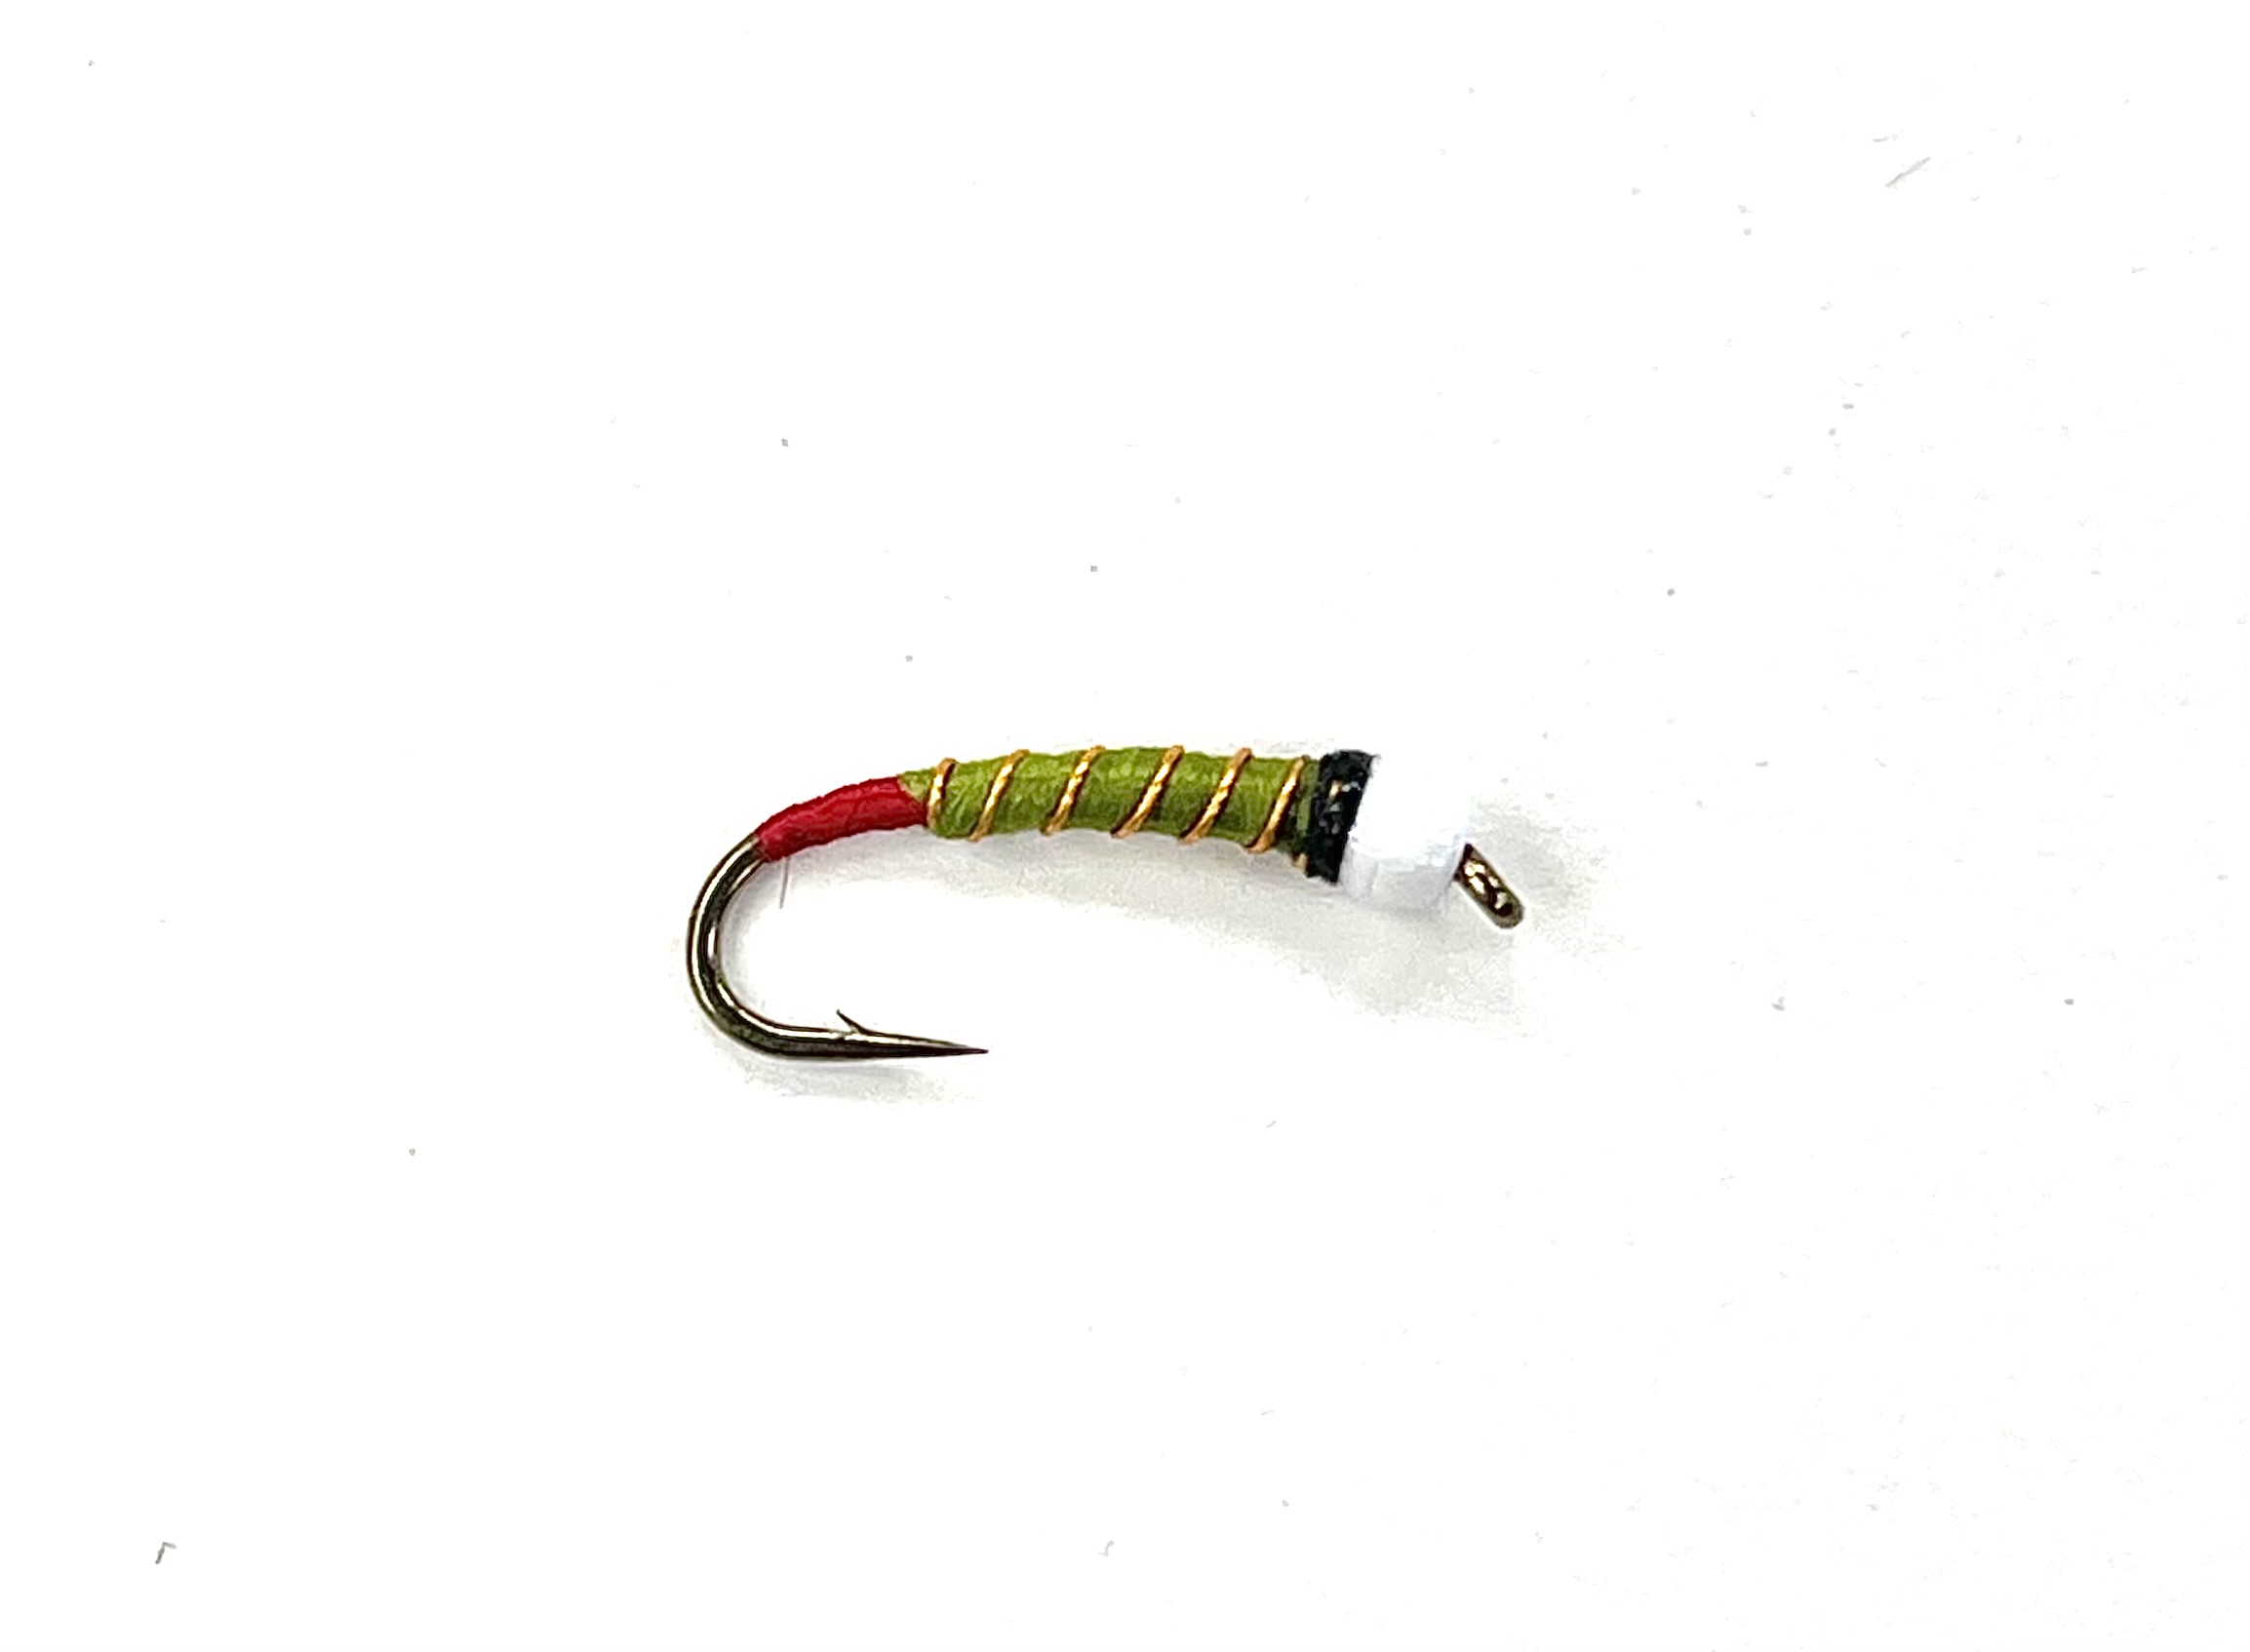 FAD Candy Cone Red Butt Chironomid - Olive/Gold Wire - Size 12